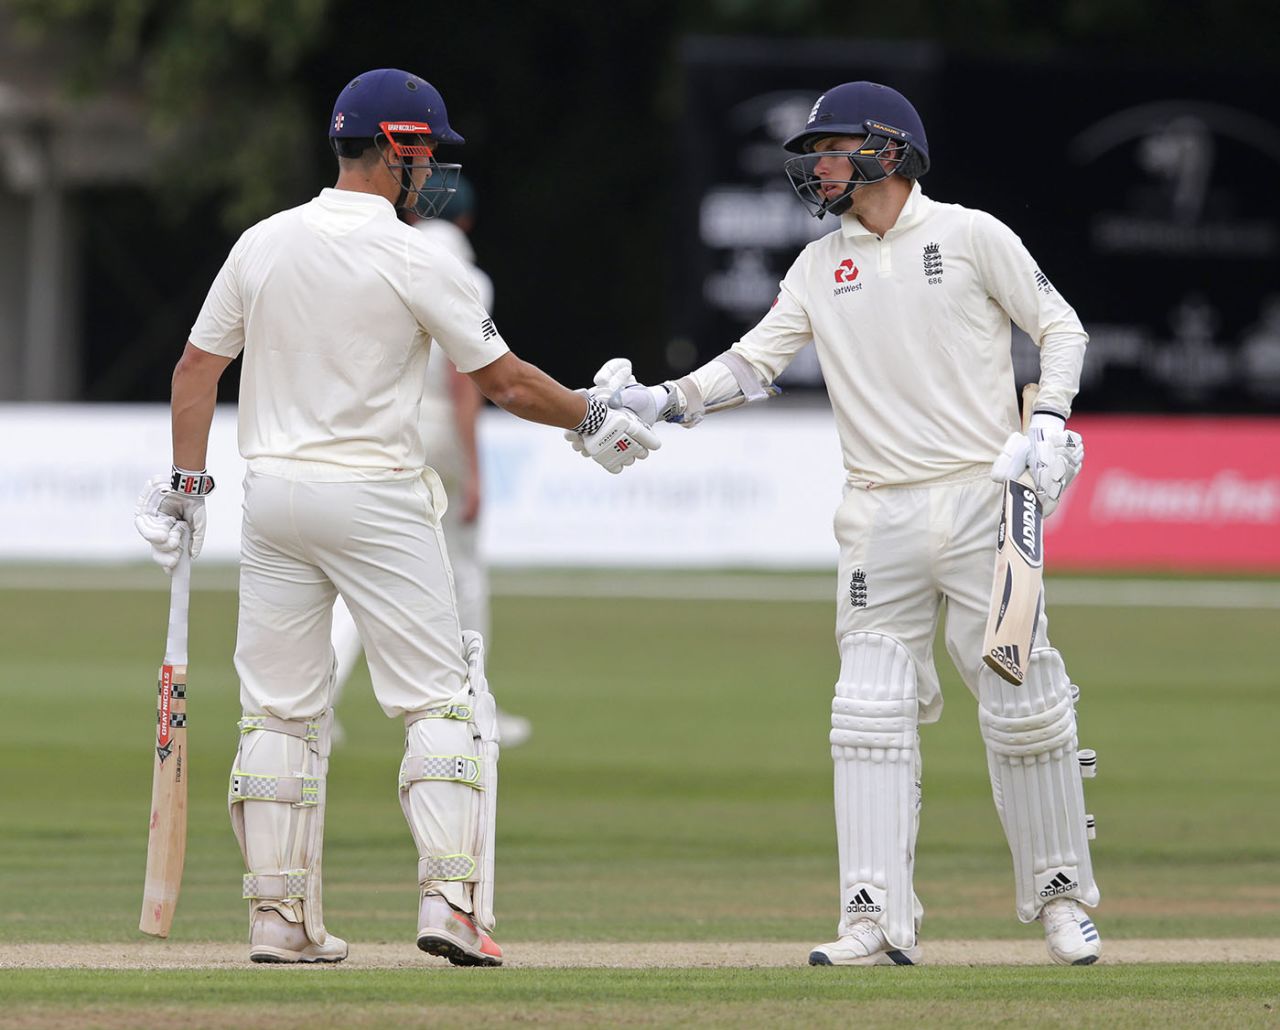 Sam Hain of England Lions is congratulated for his fifty by Sam Curran (right), England Lions v Australians, Tour match, Canterbury, 4th day, July 17, 2019